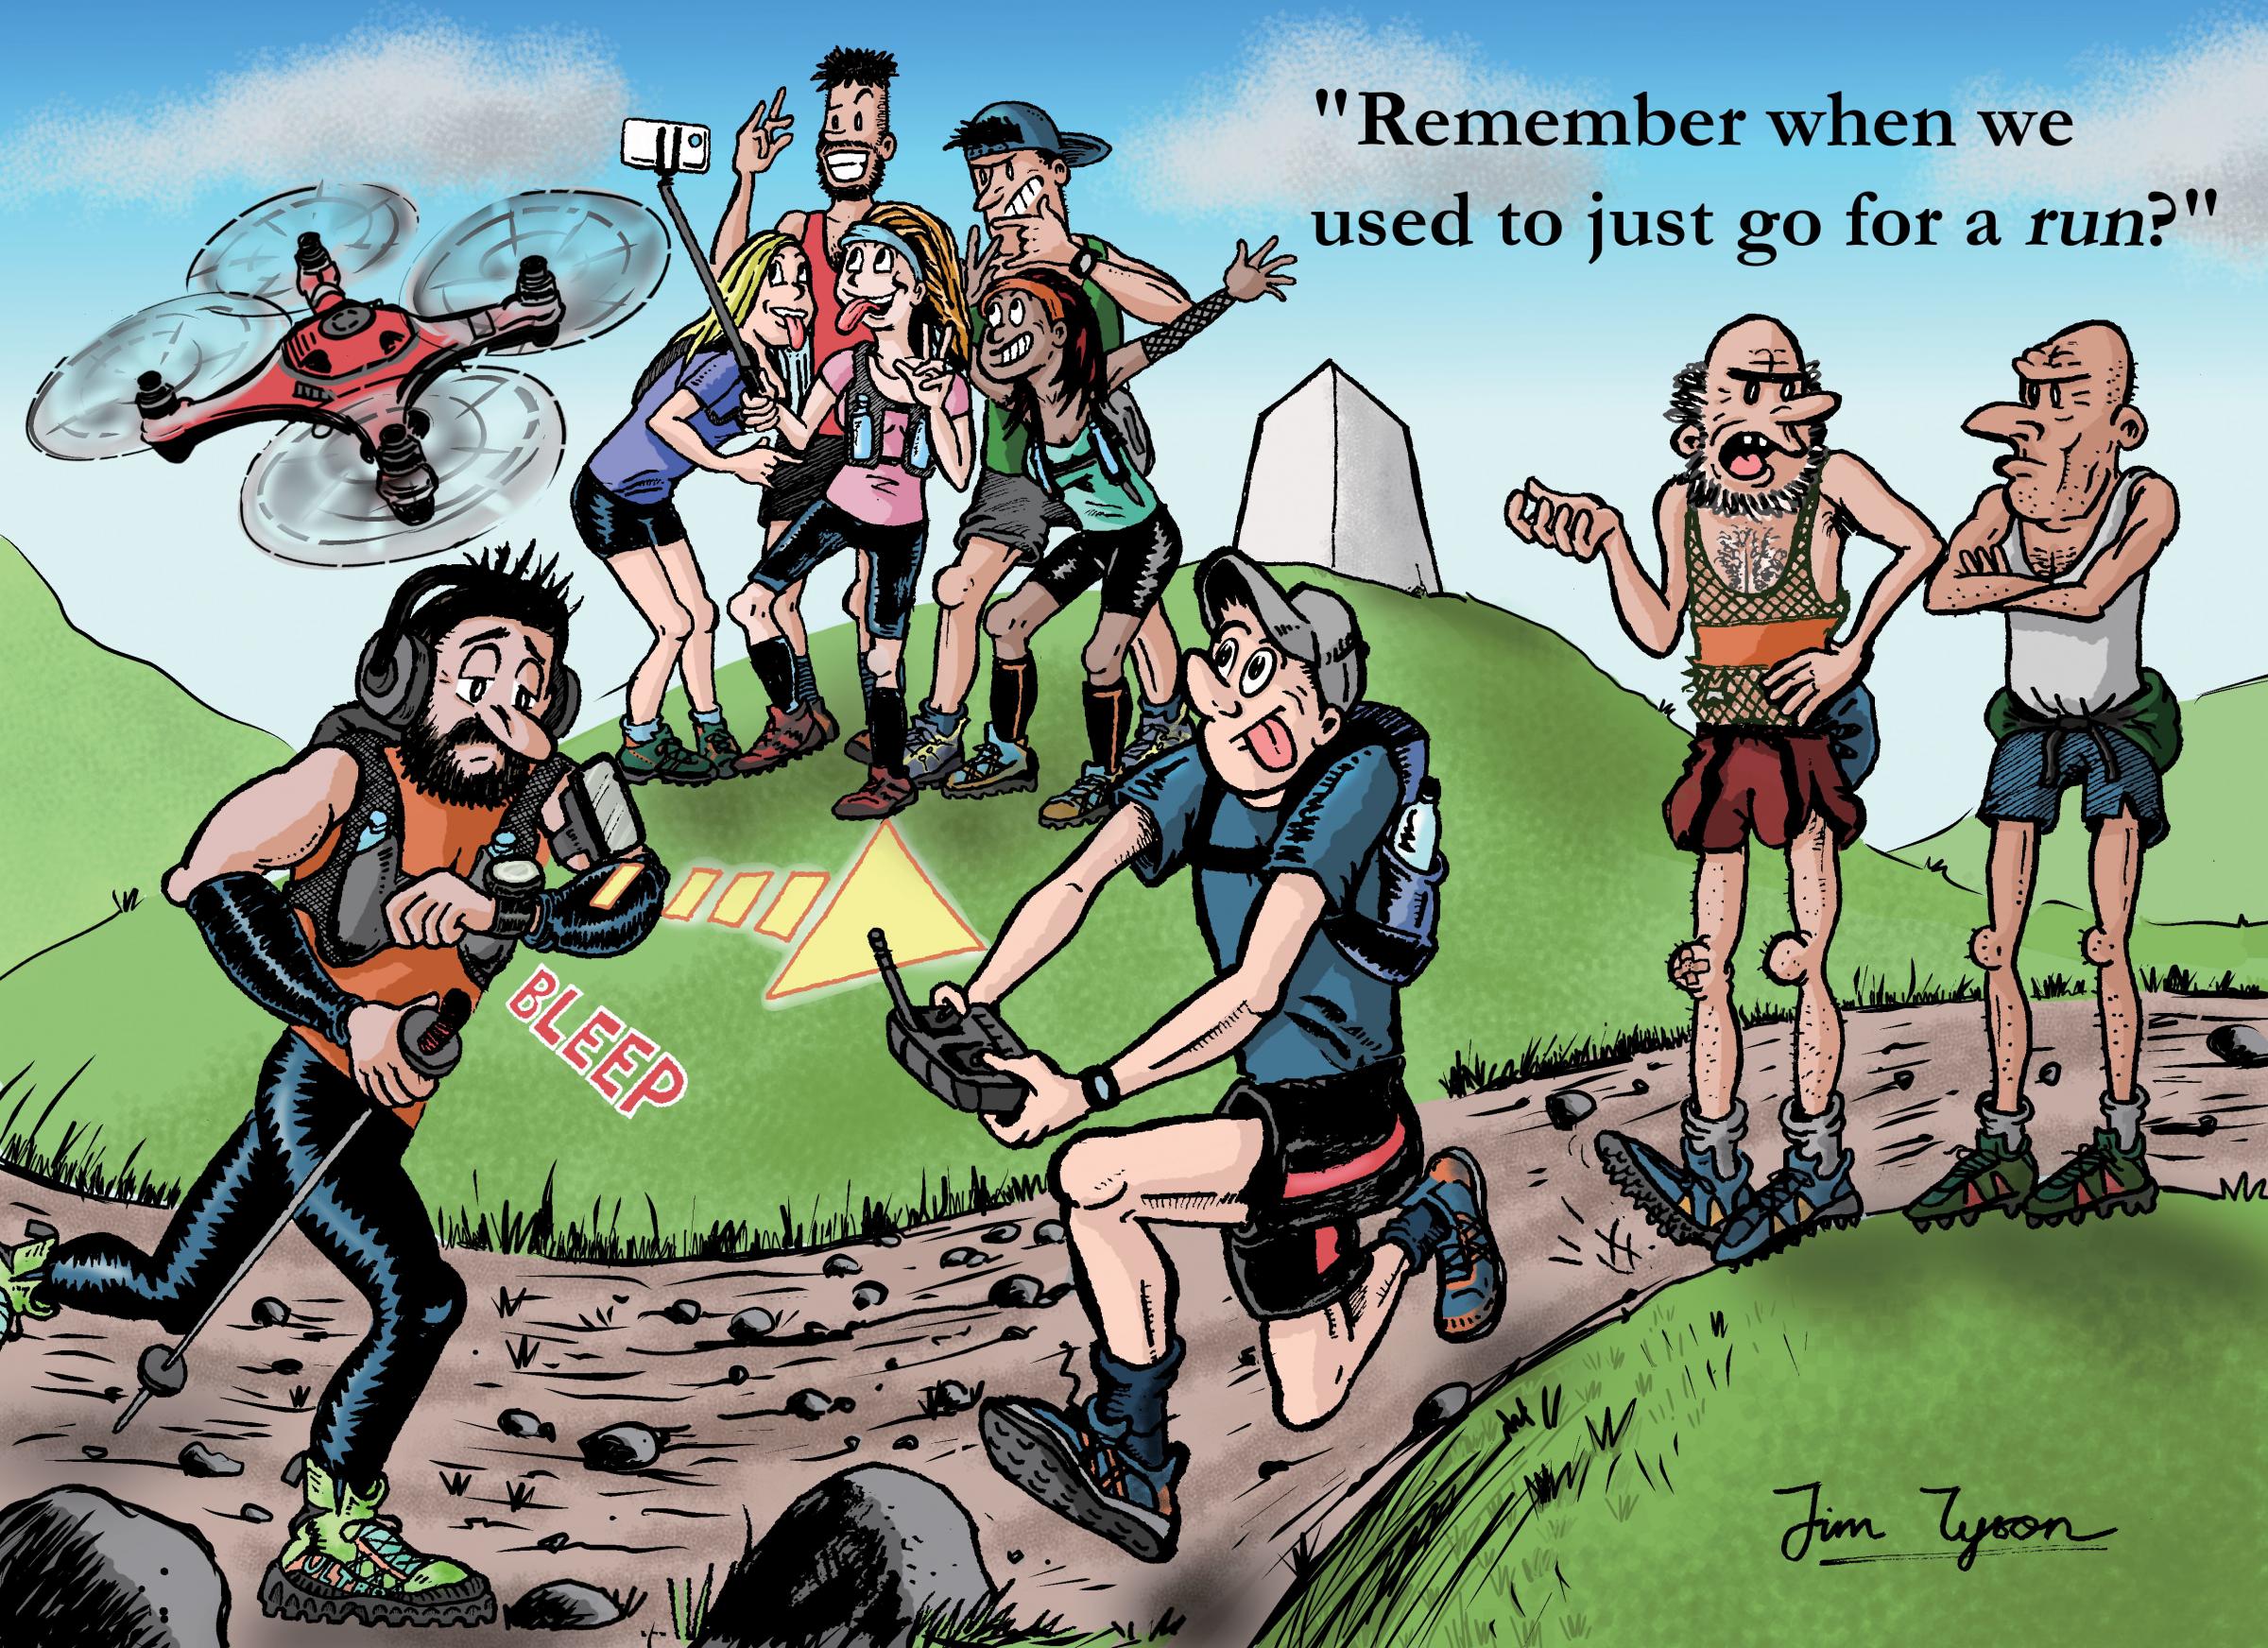 SKILFUL: Jim Tyson has created a calendar combining his love of cartoons and fell running